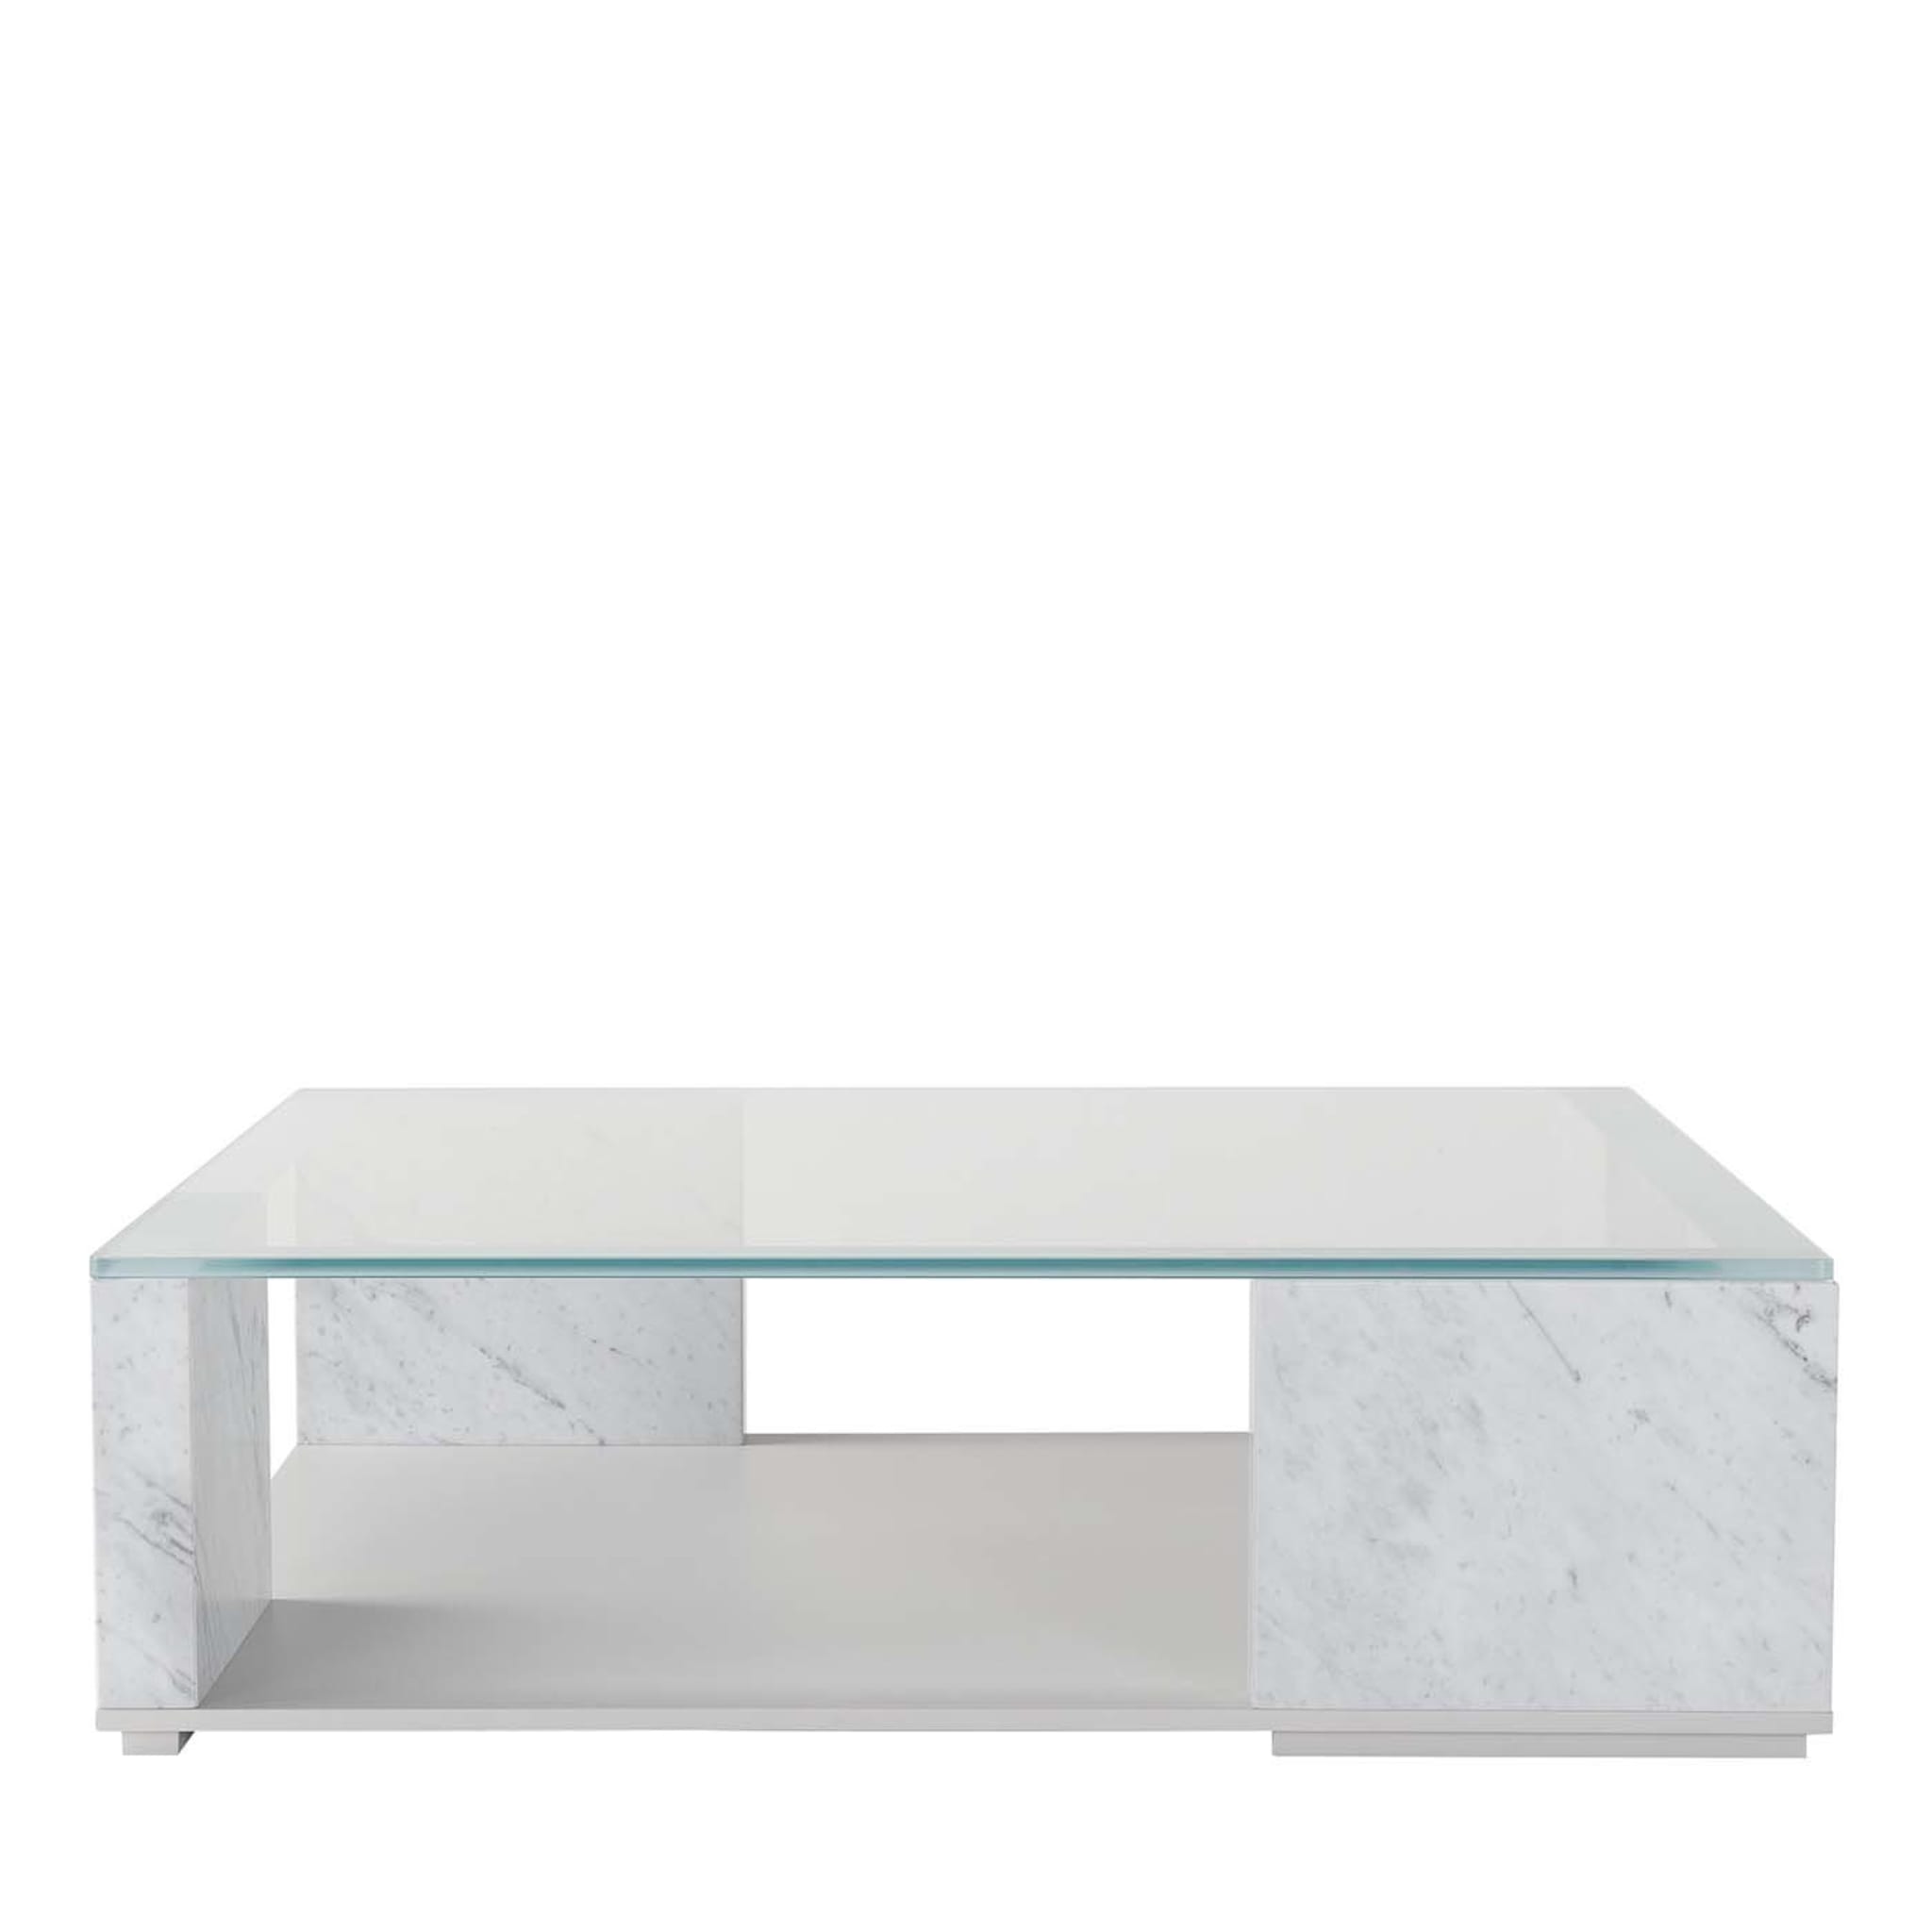 Quattropietre Coffee Table by Anton Cristell and Emanuel Gargano - Main view